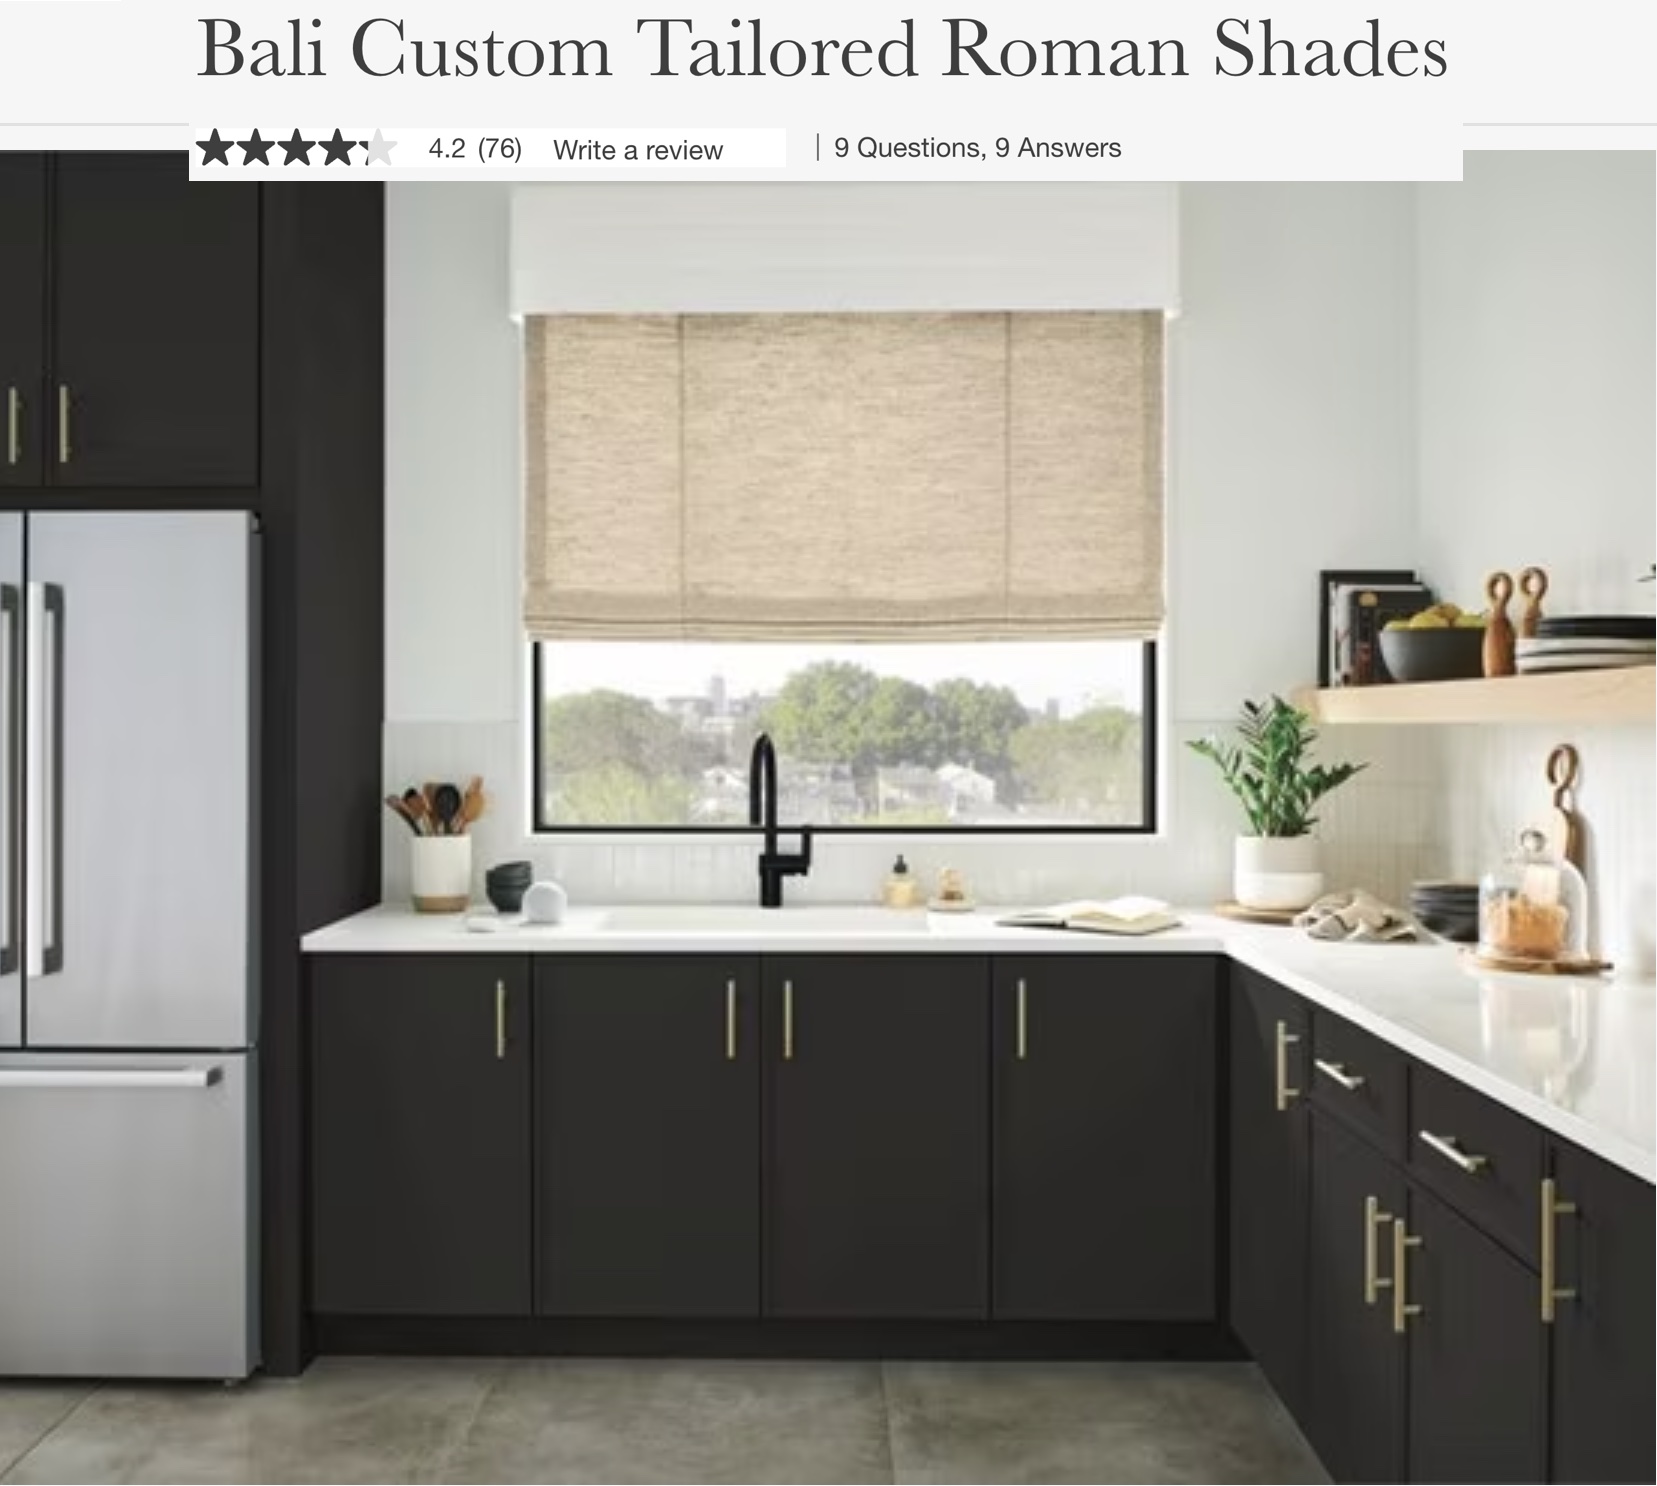 american blinds review bali custom tailored roman shades 